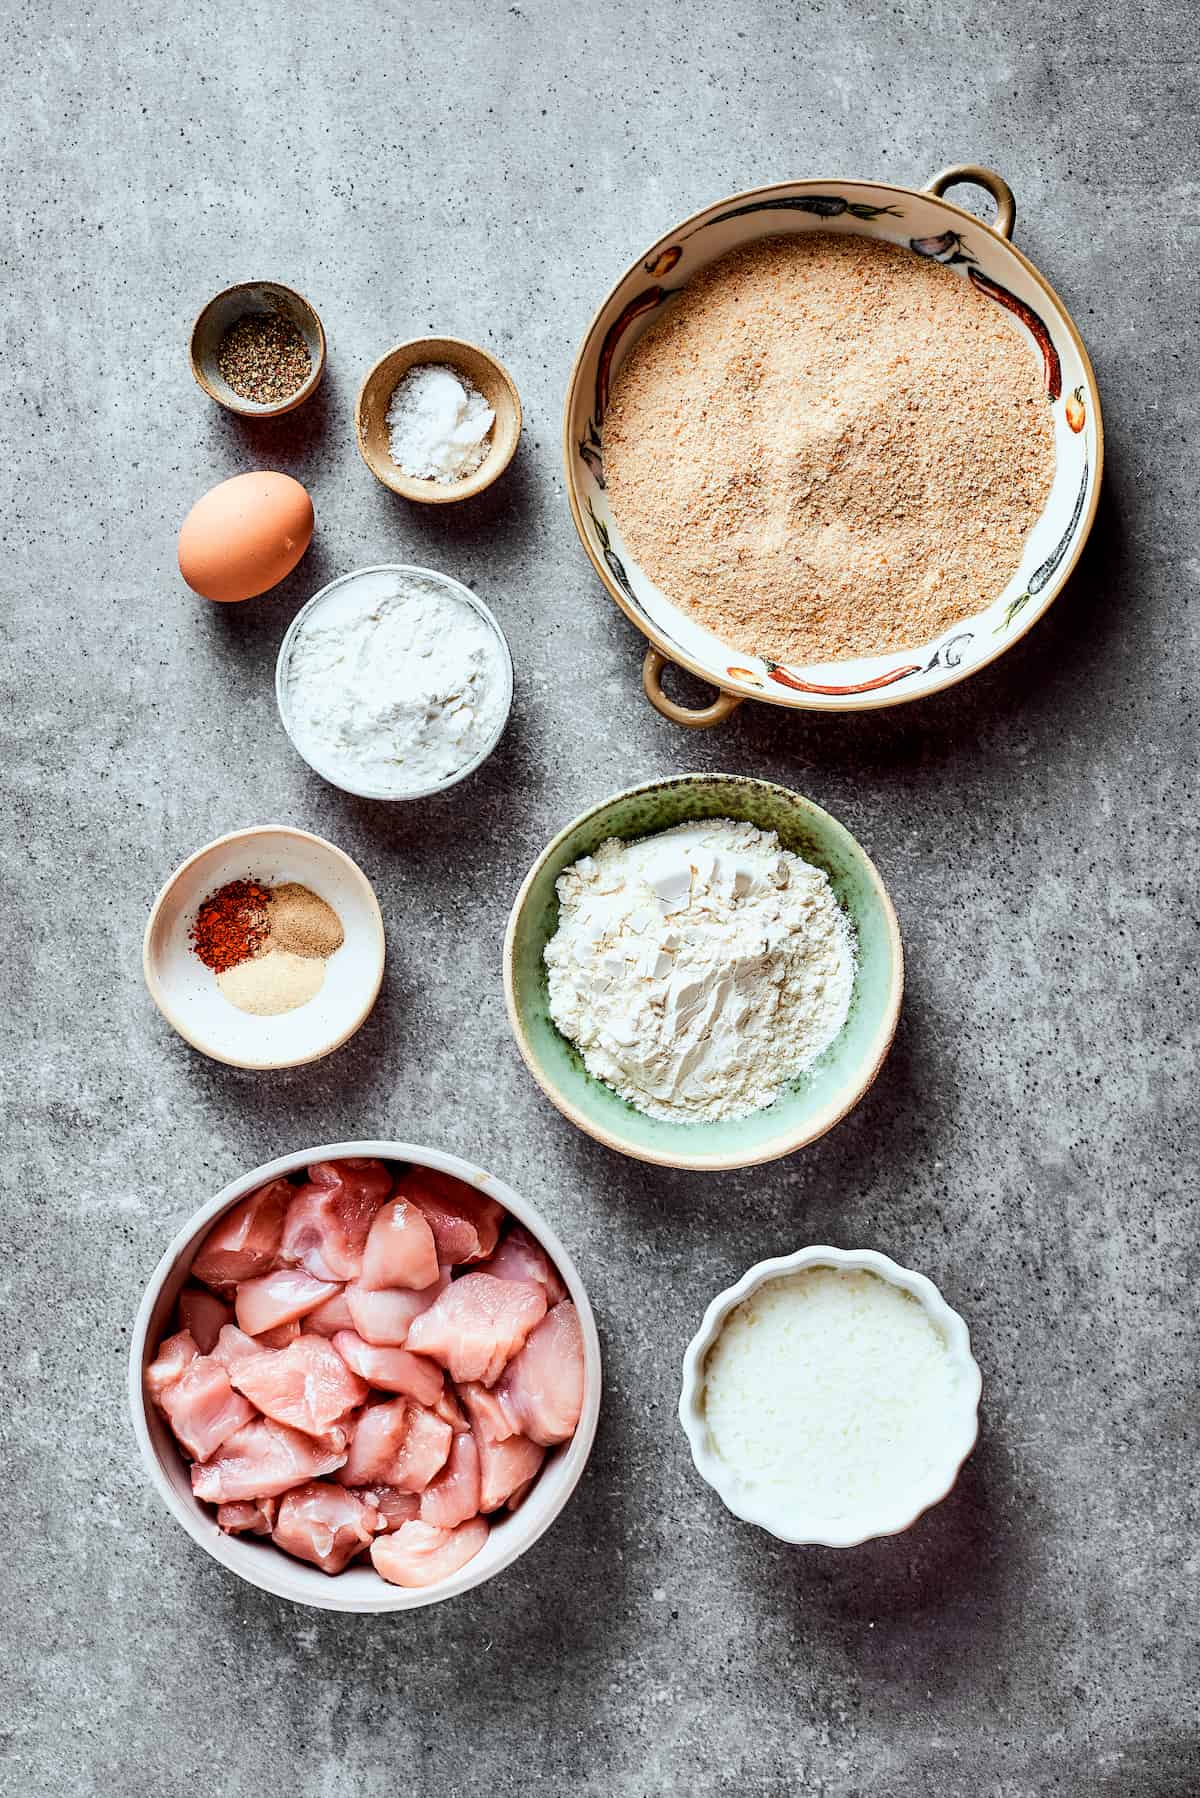 Overhead view of the ingredients needed for bang bang chicken: a bowl of chicken slices, a bowl of flour, a bowl of panko breadcrumbs, a bowl of buttermilk, a bowl of cornstarch, an egg, a bowl of salt, a bowl of pepper, and a bowl of garlic powder, chili powder, and white pepper.